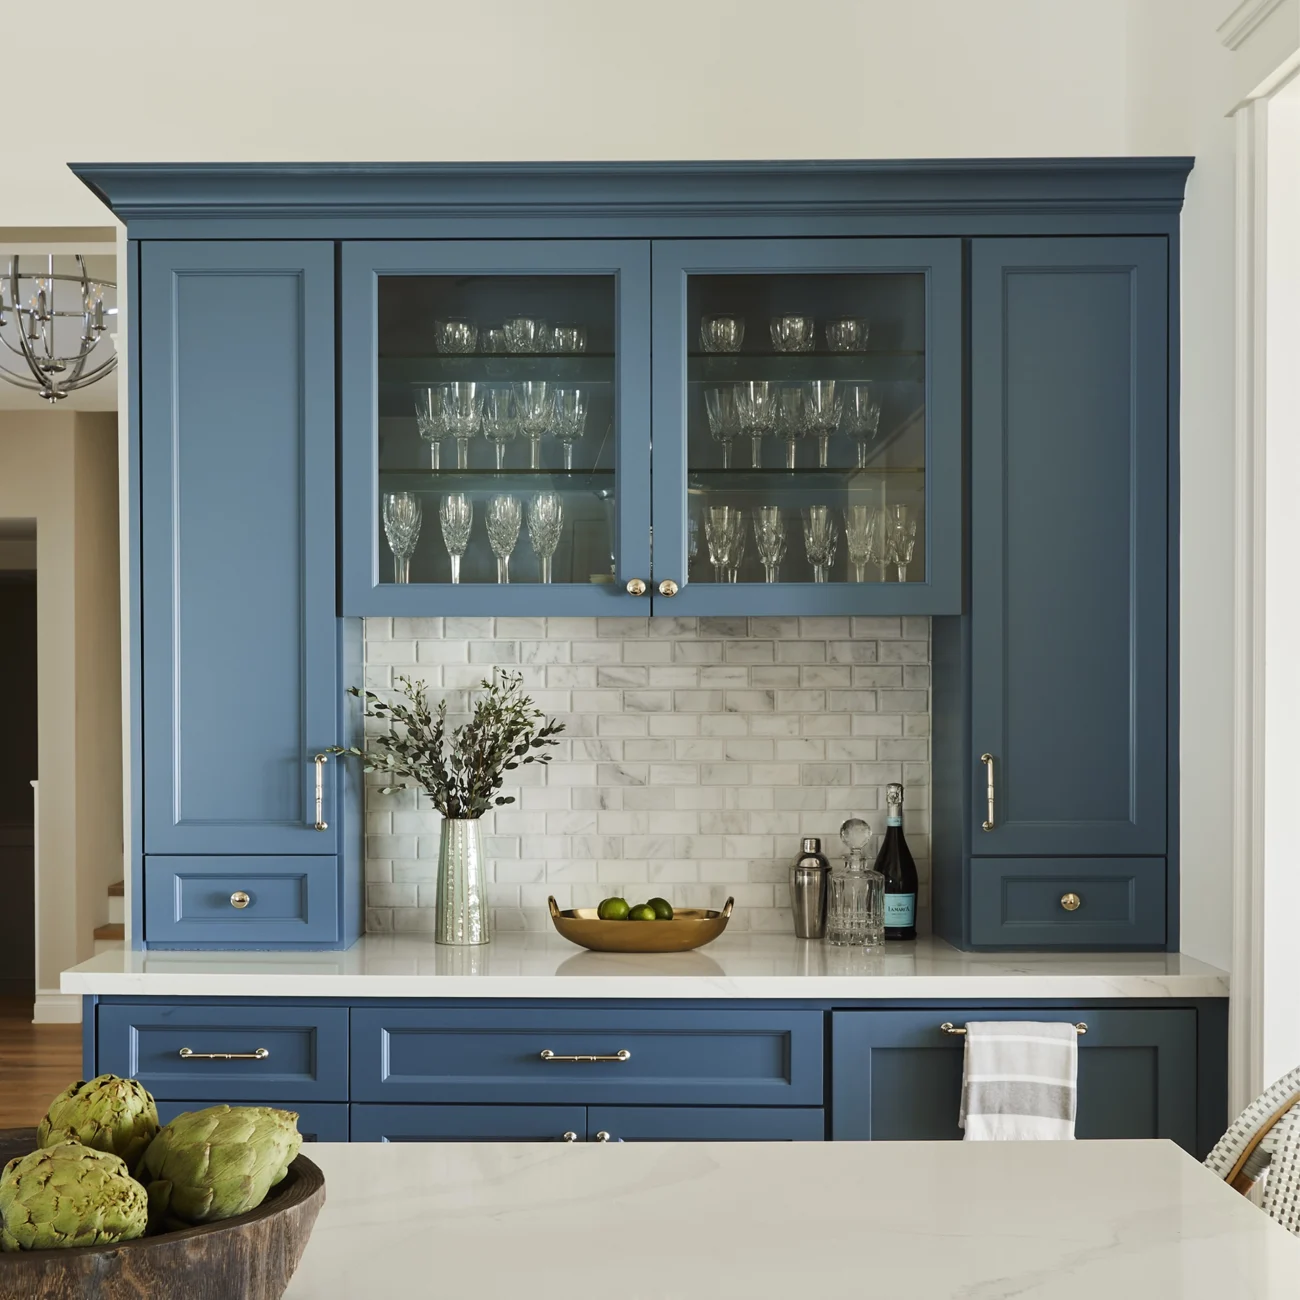 Christine Vroom Interiors Vigilance | Kitchen with hardwood floors and blue cabinet built-in